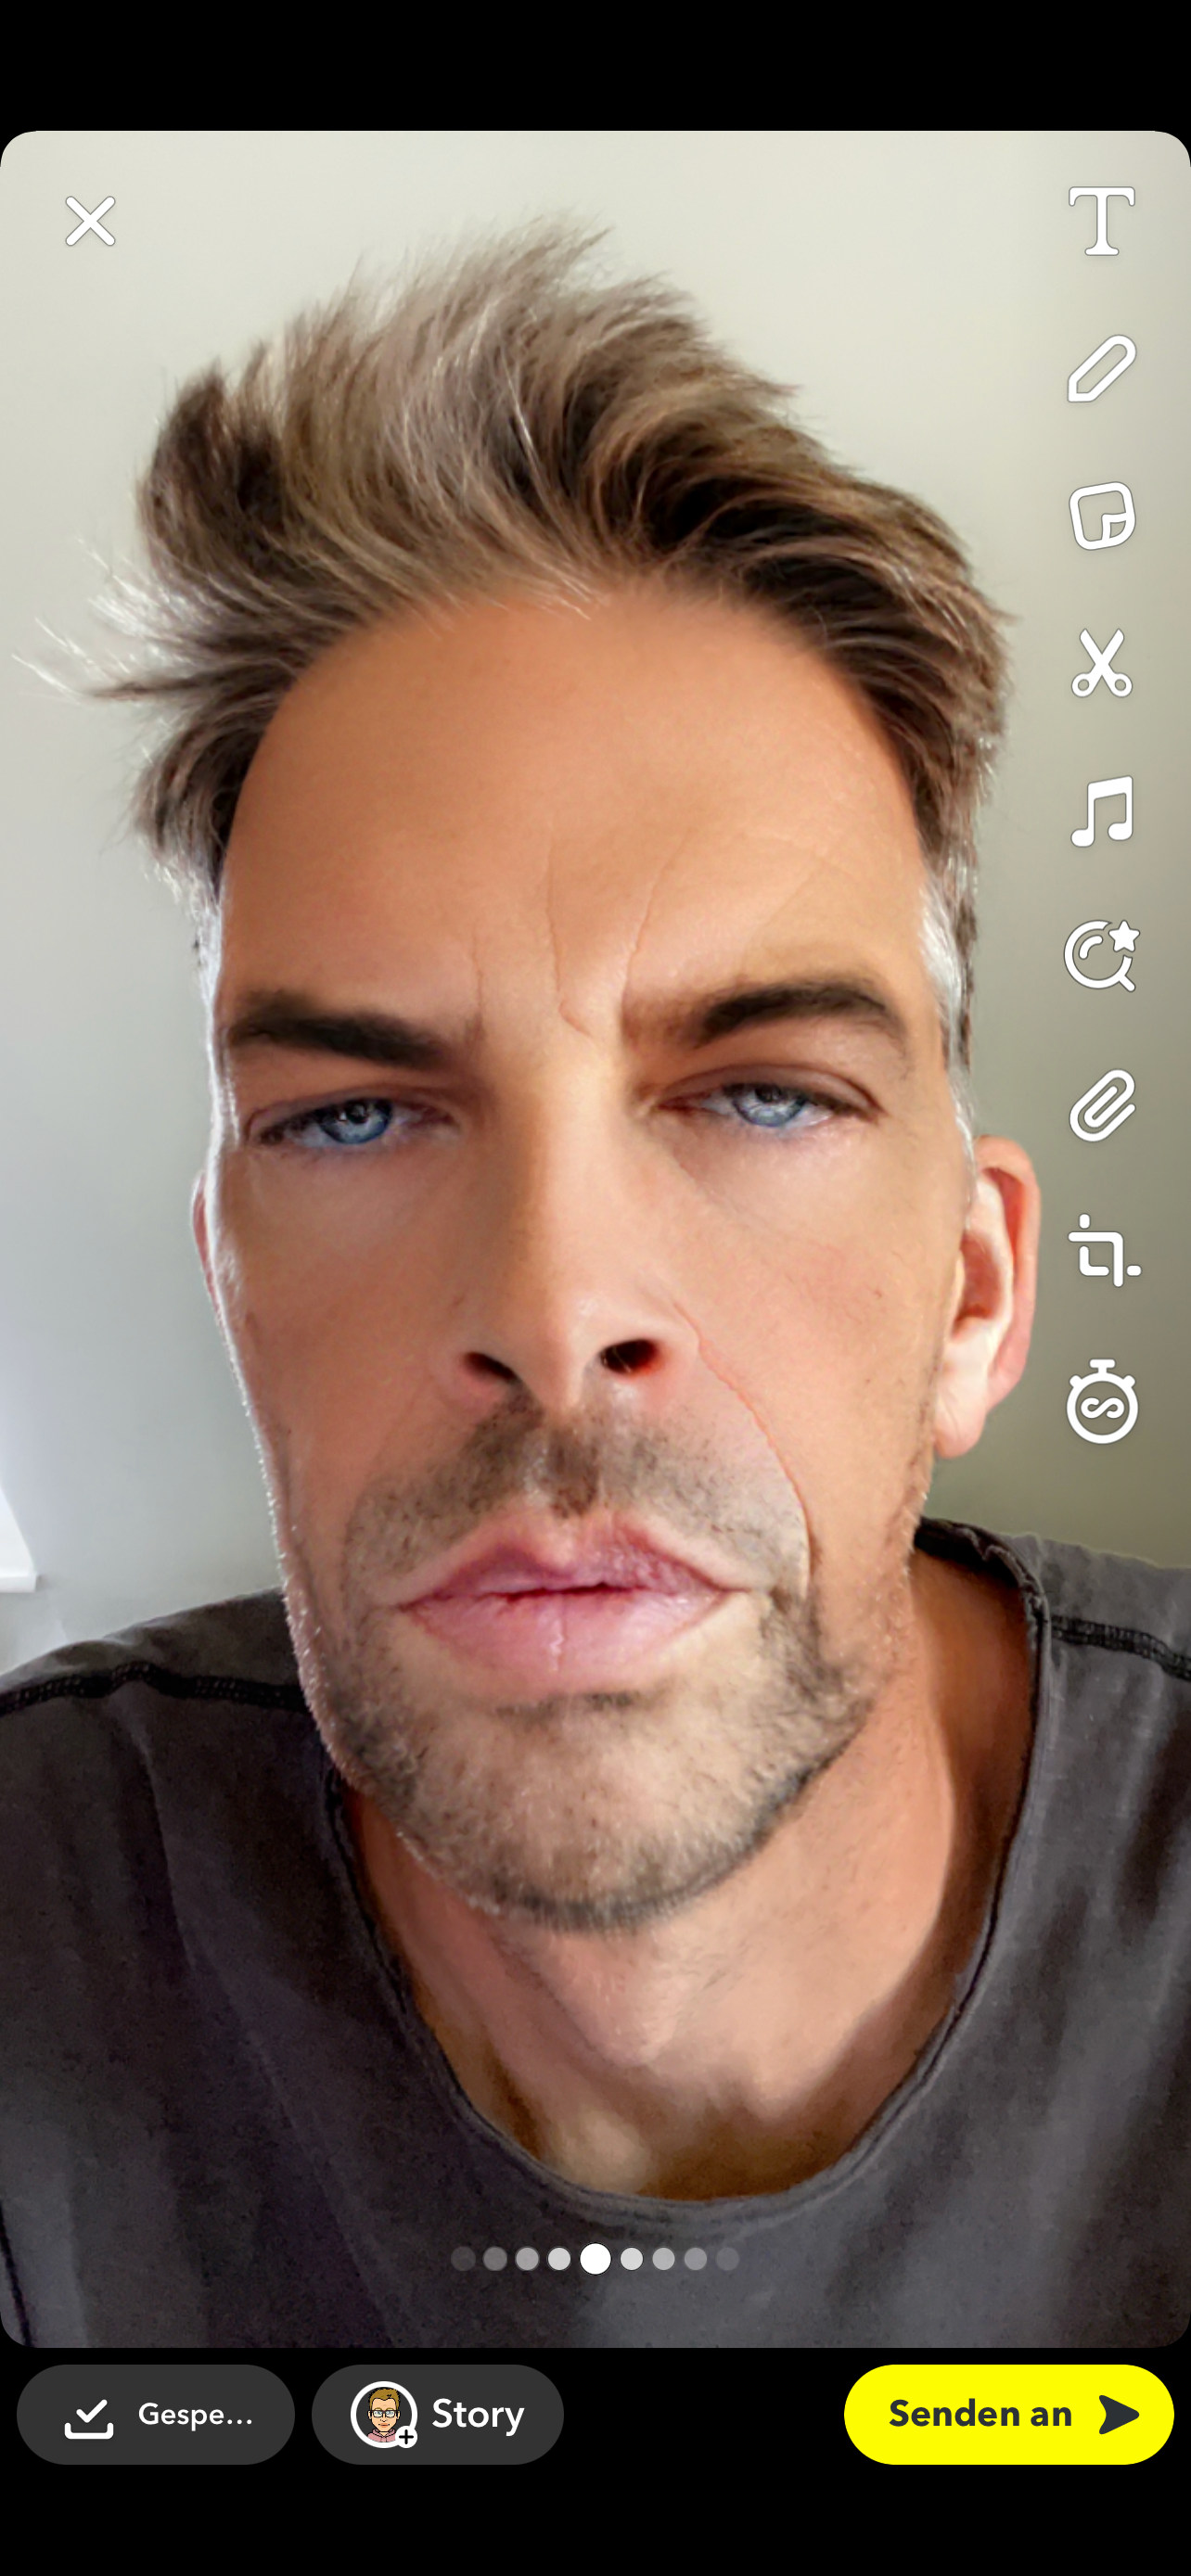 Carsten Rossi with Snapchat Filer, making him look younger.